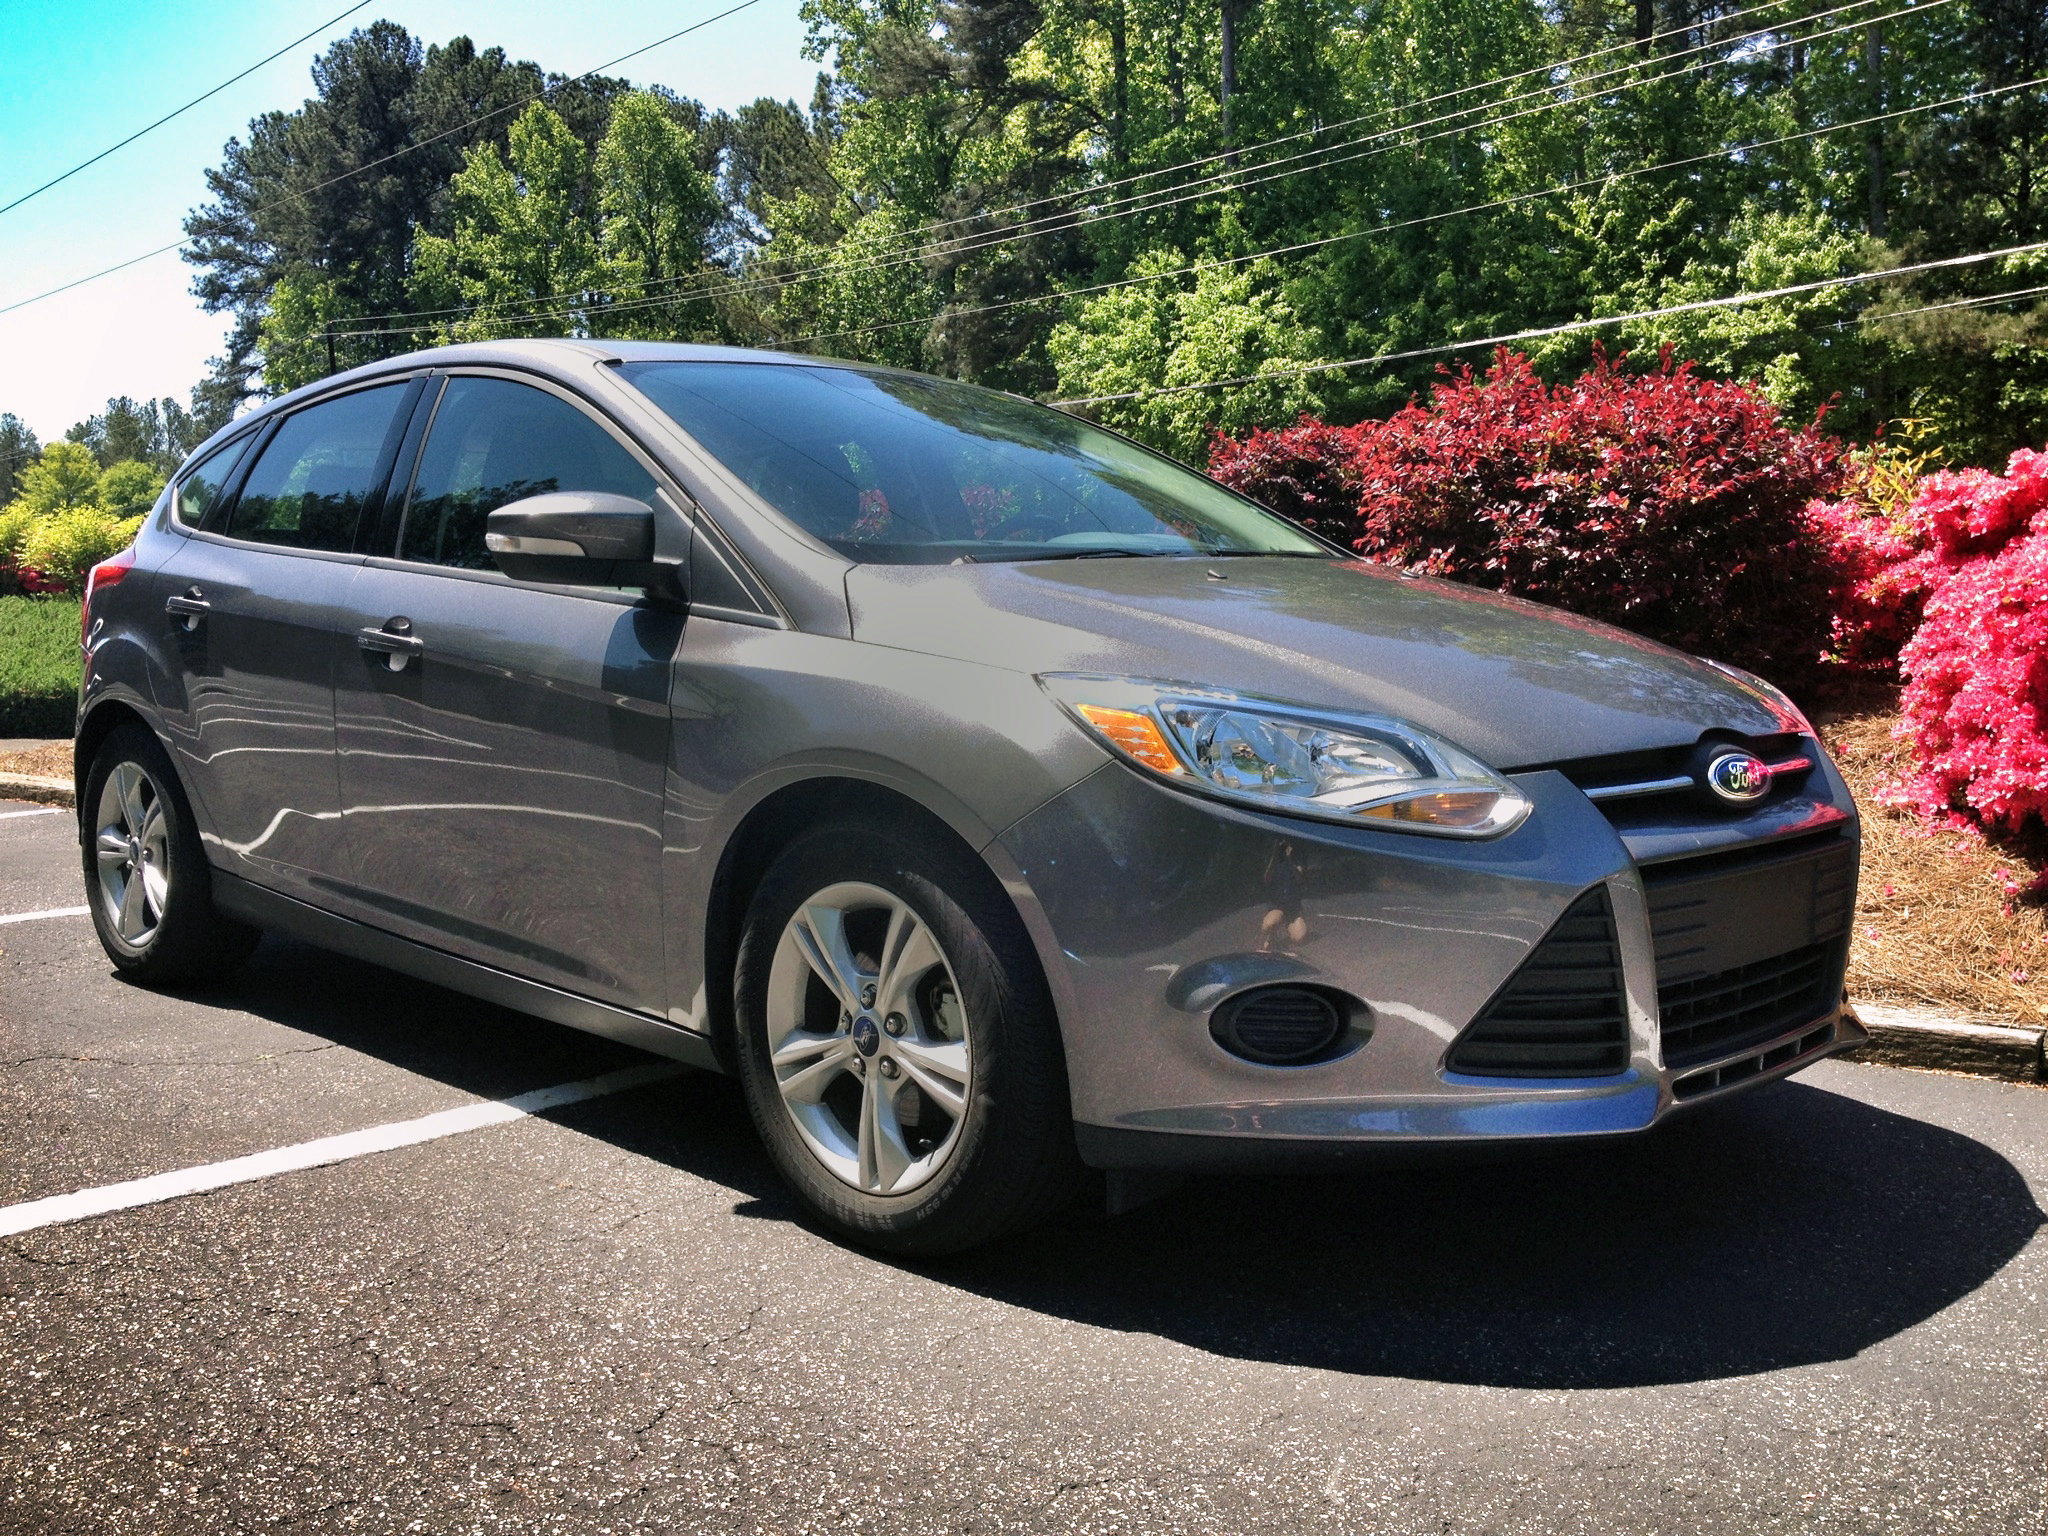 Used 2013 Ford Focus for Sale with Photos  CarGurus